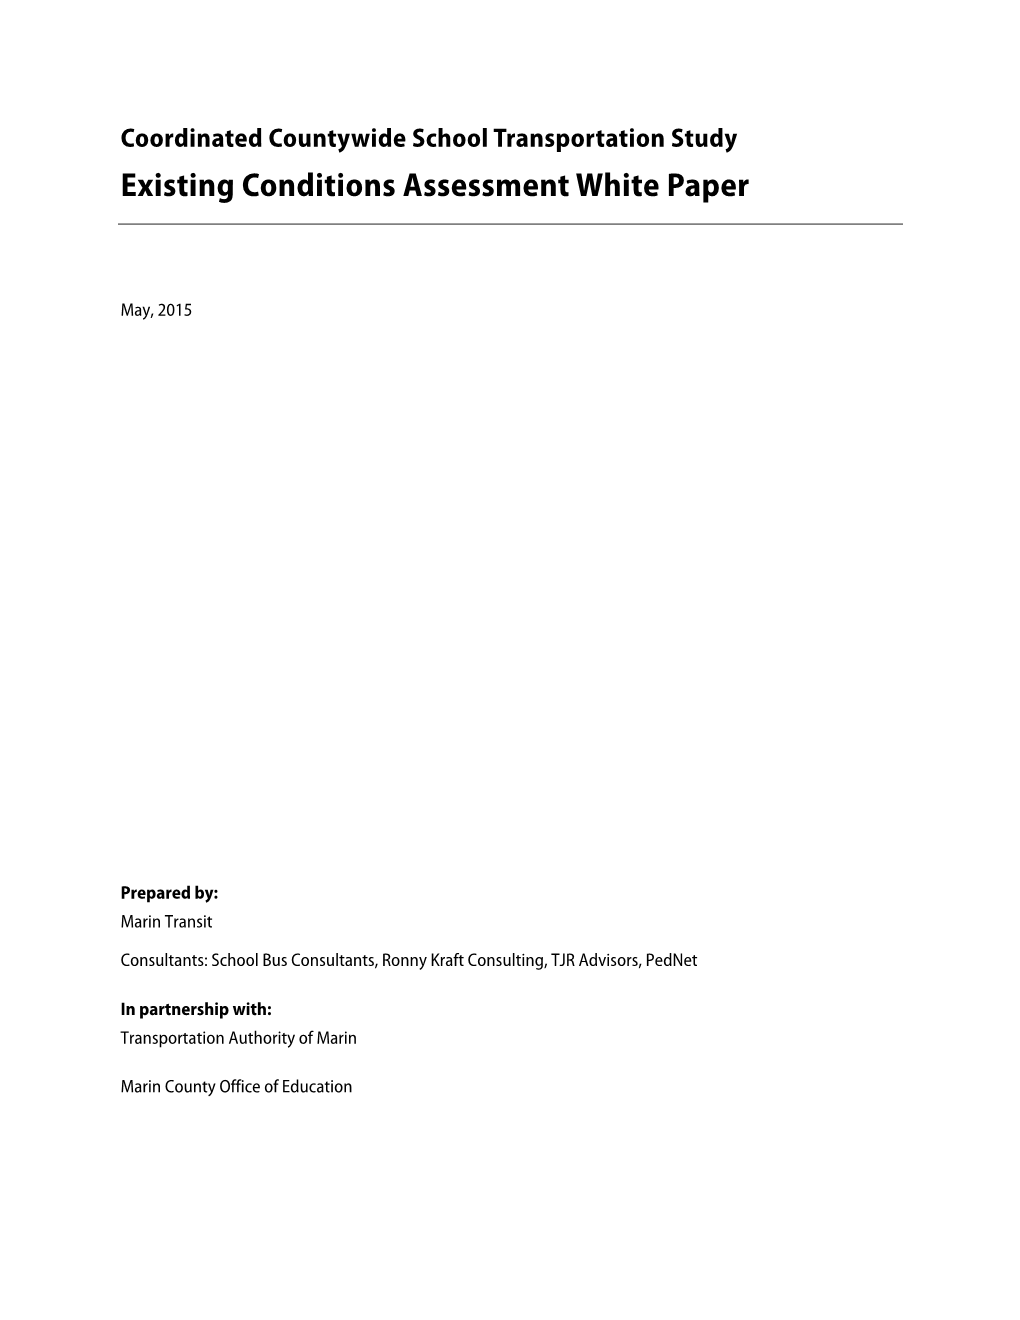 Existing Conditions Assessment White Paper